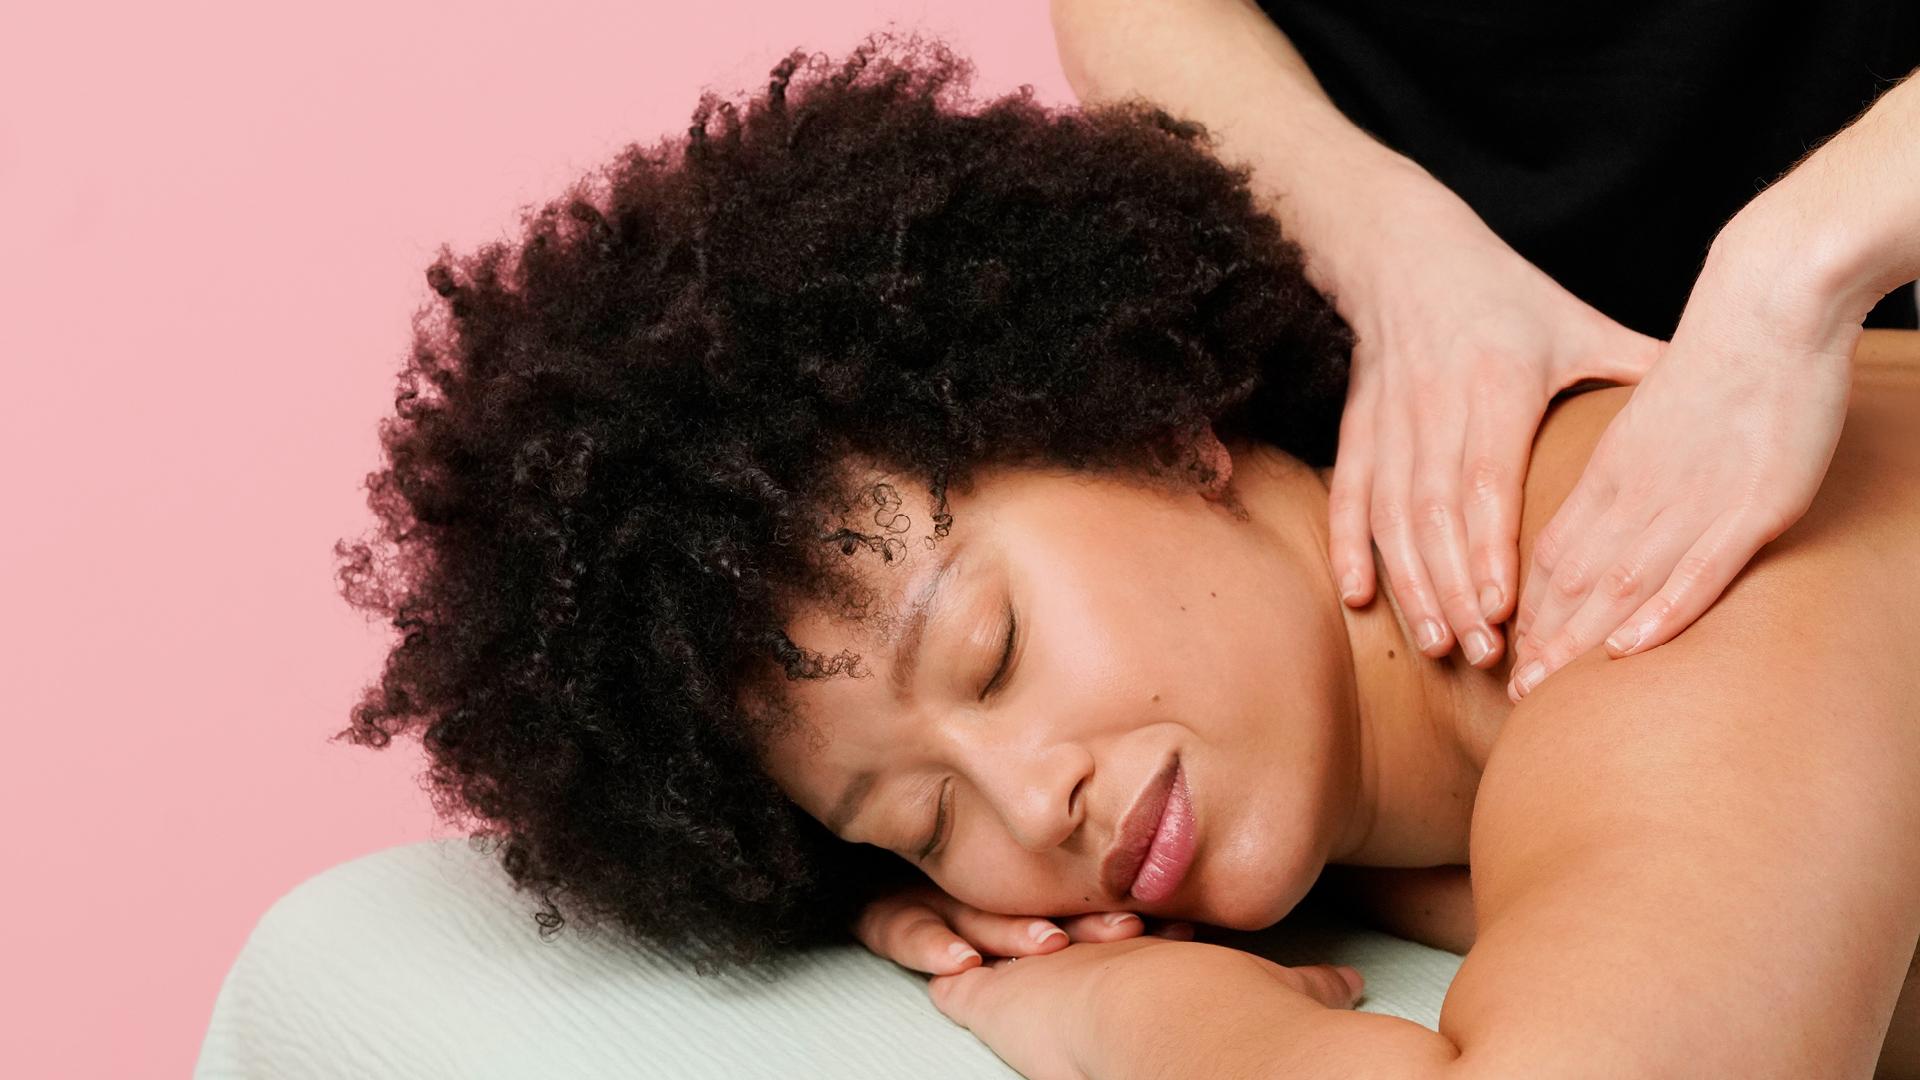 A guide to the types of massage and how to choose